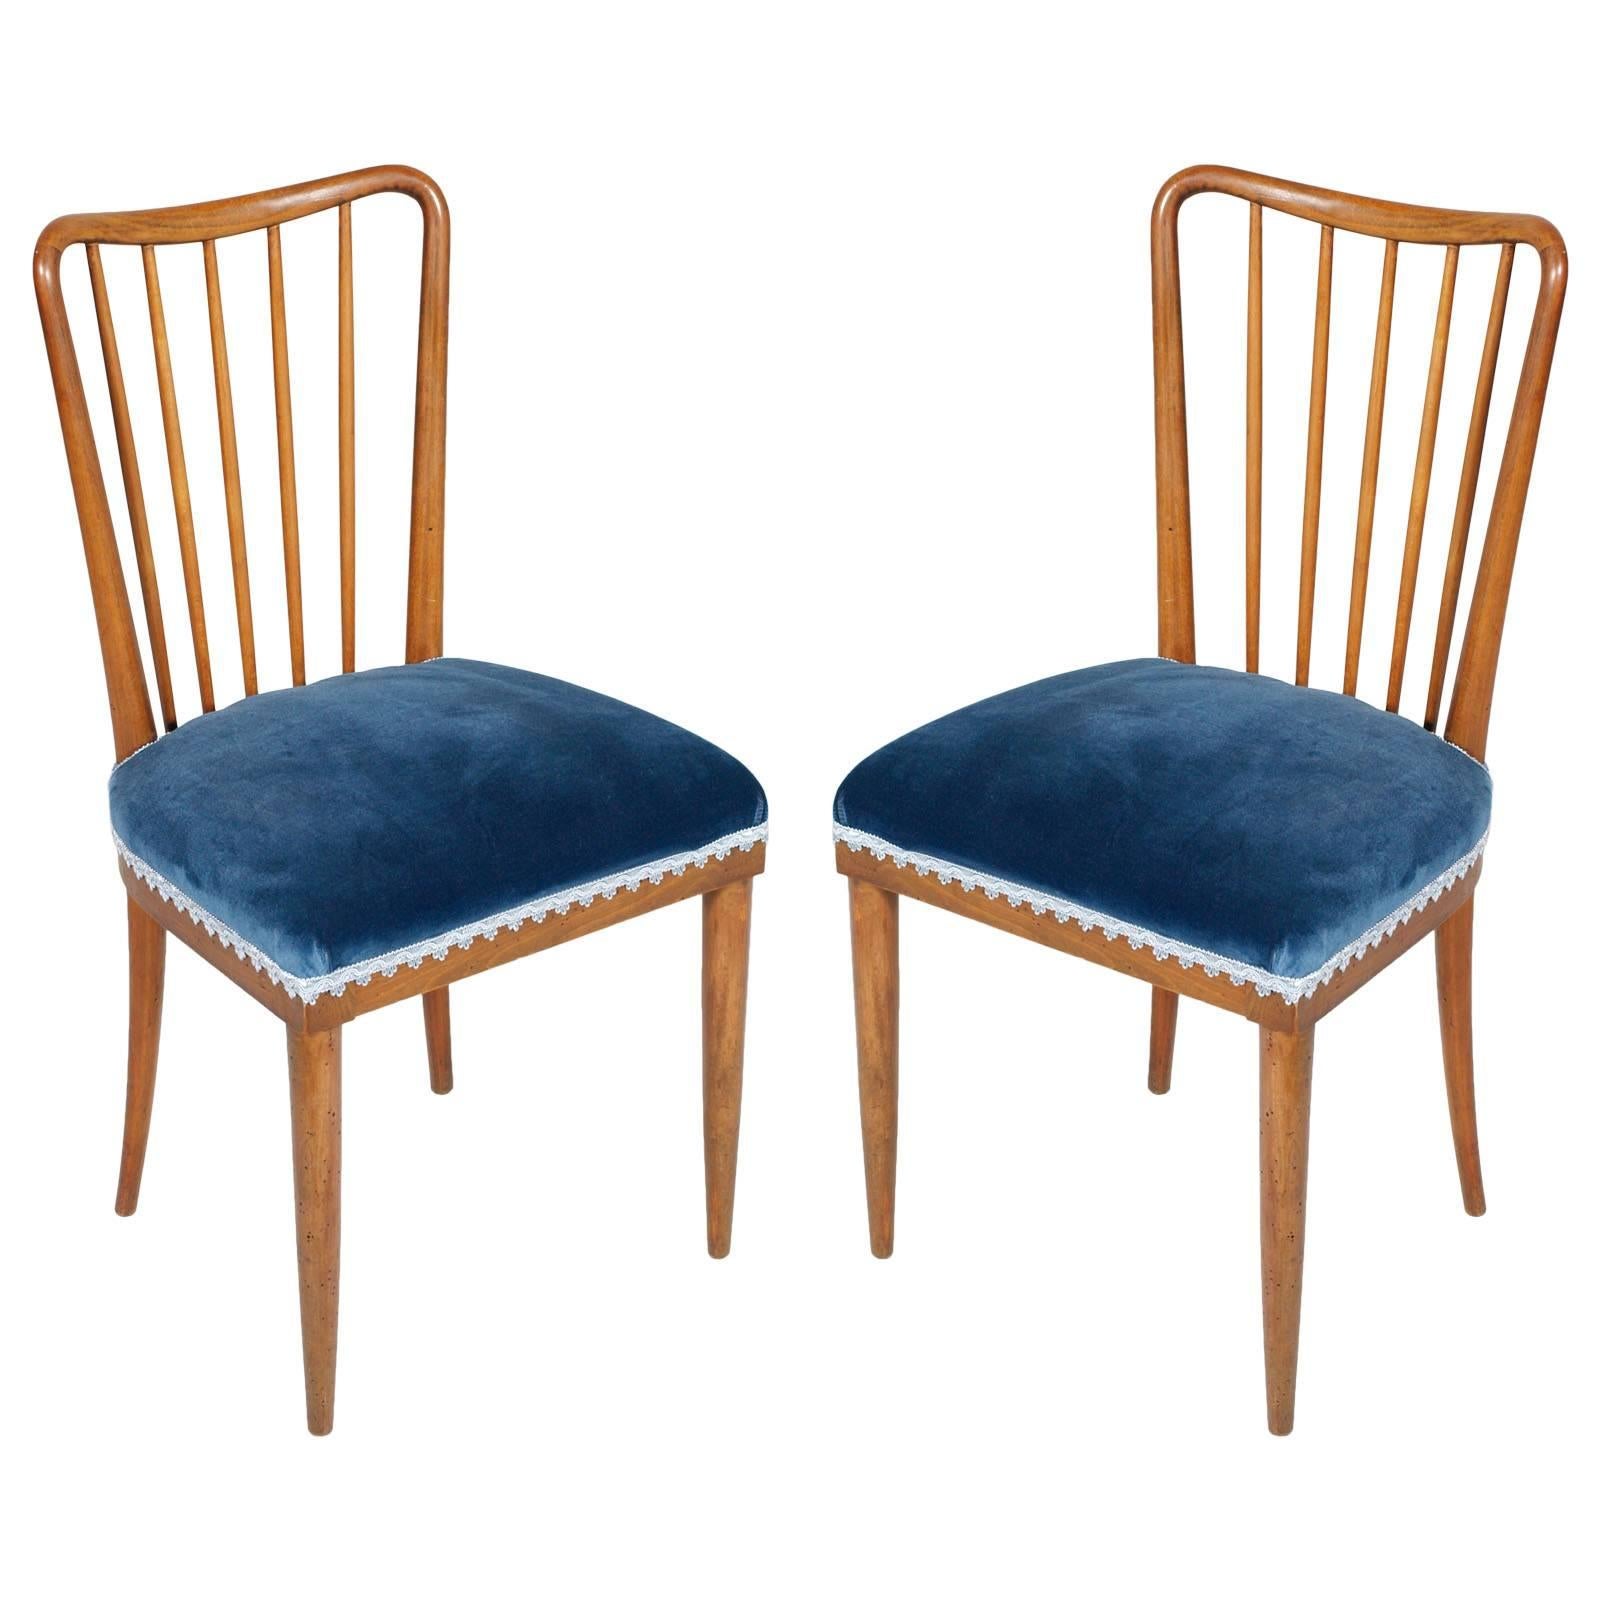 Mid-Century Modern 1950s Paolo Buffa Side Chairs in Blond Walnut New Upholstery